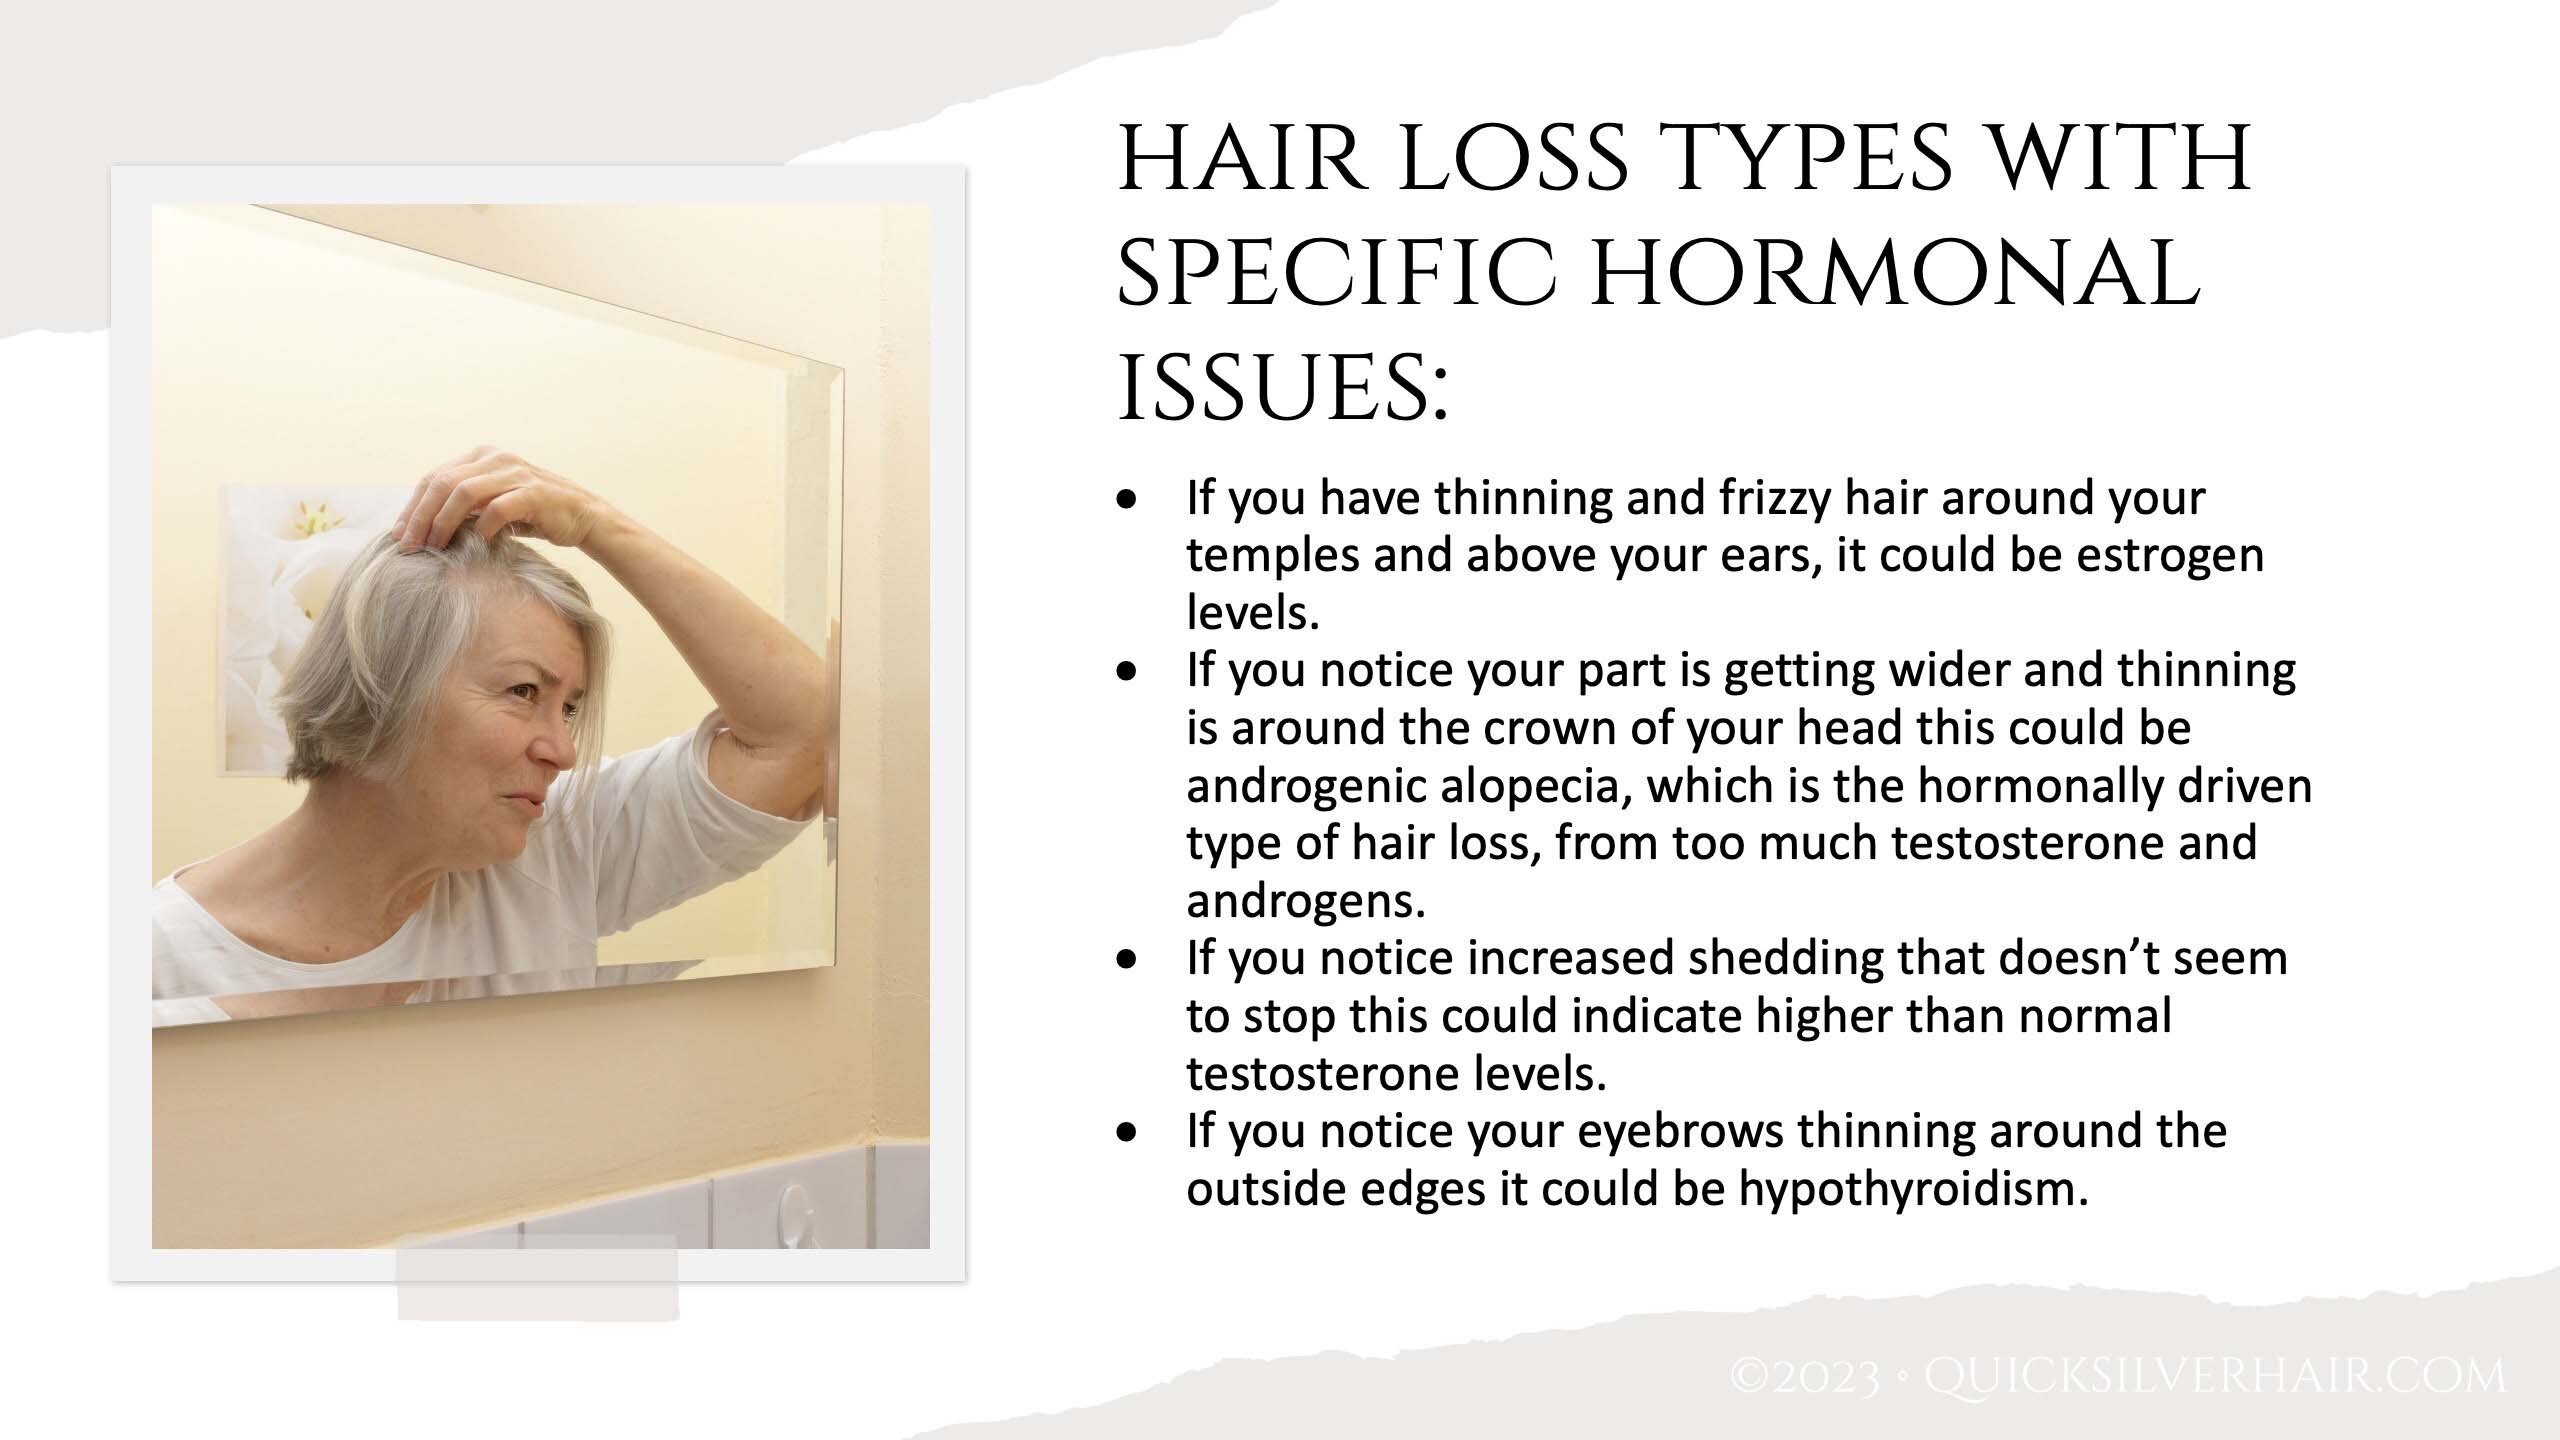 Hair Loss Types with Specific Hormonal Issues Graphic